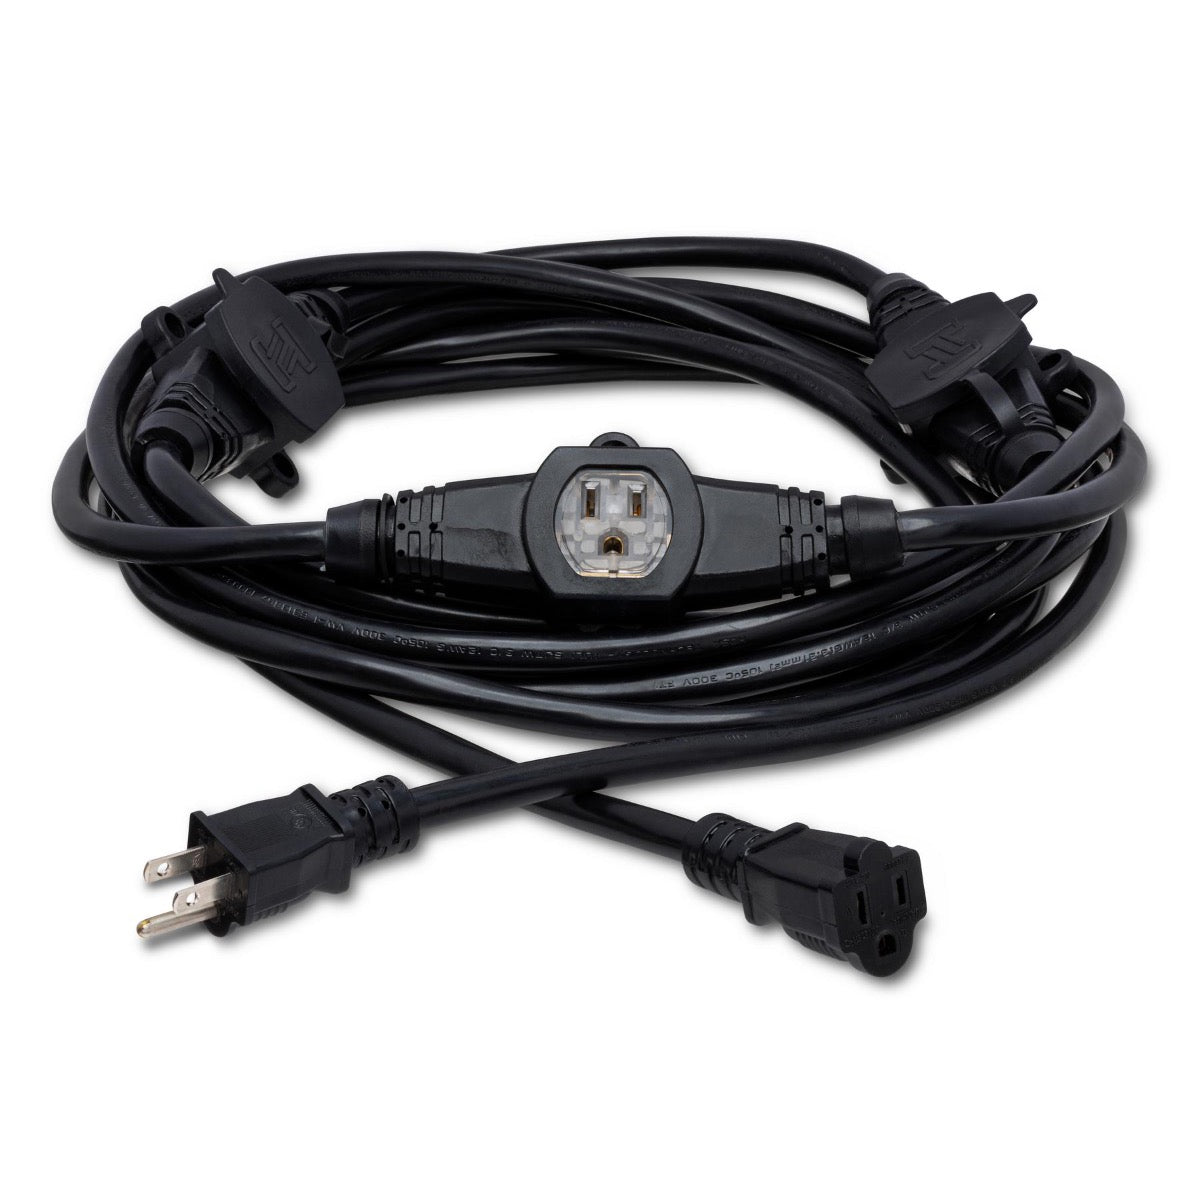 Hosa PDX-225 3 outlet Power Distribution Cord 25ft, View 1